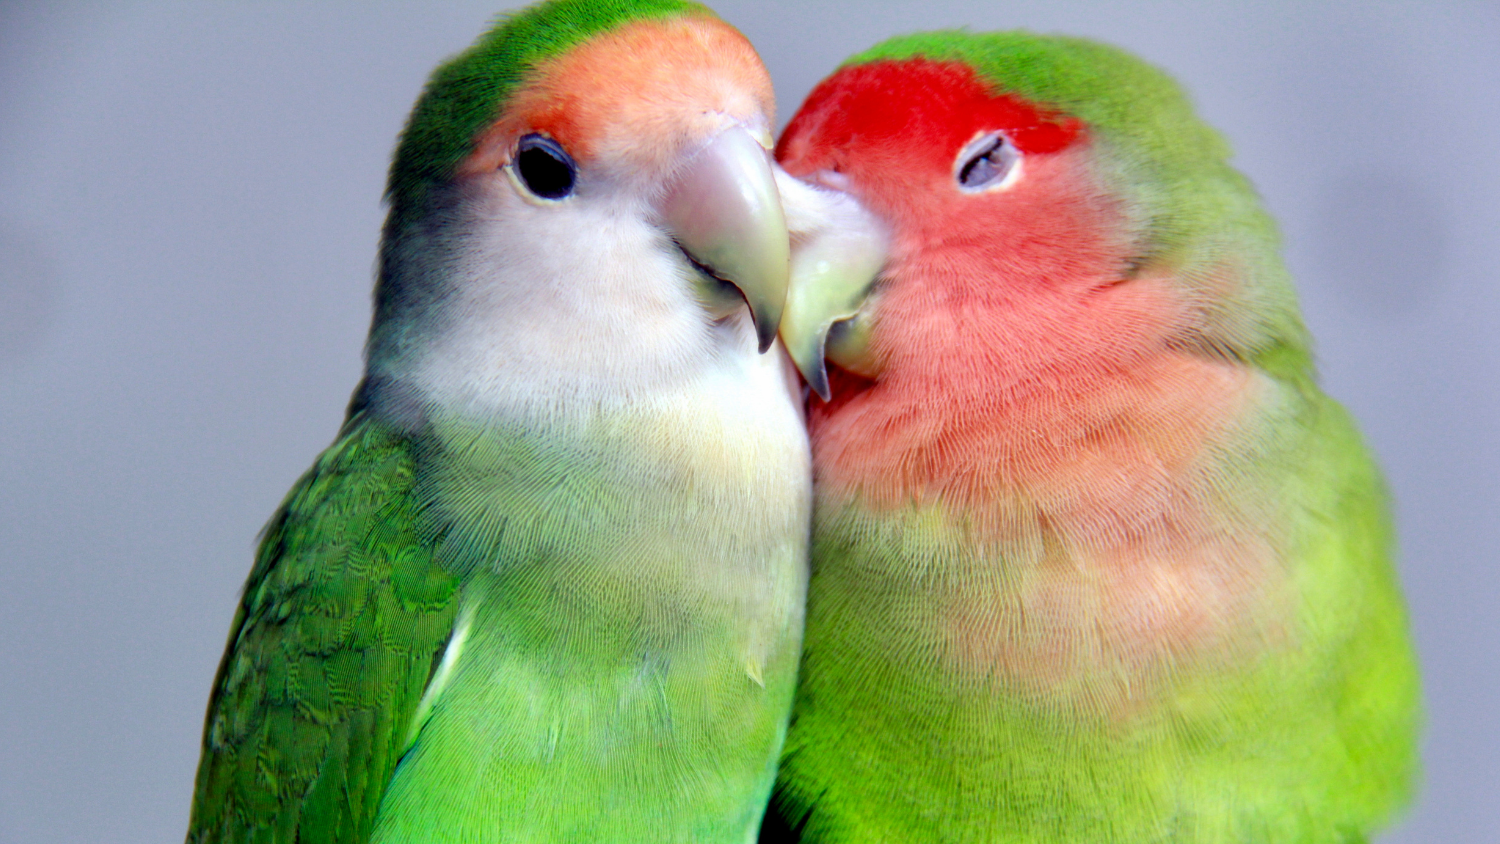 Love birds nuzzling with each other